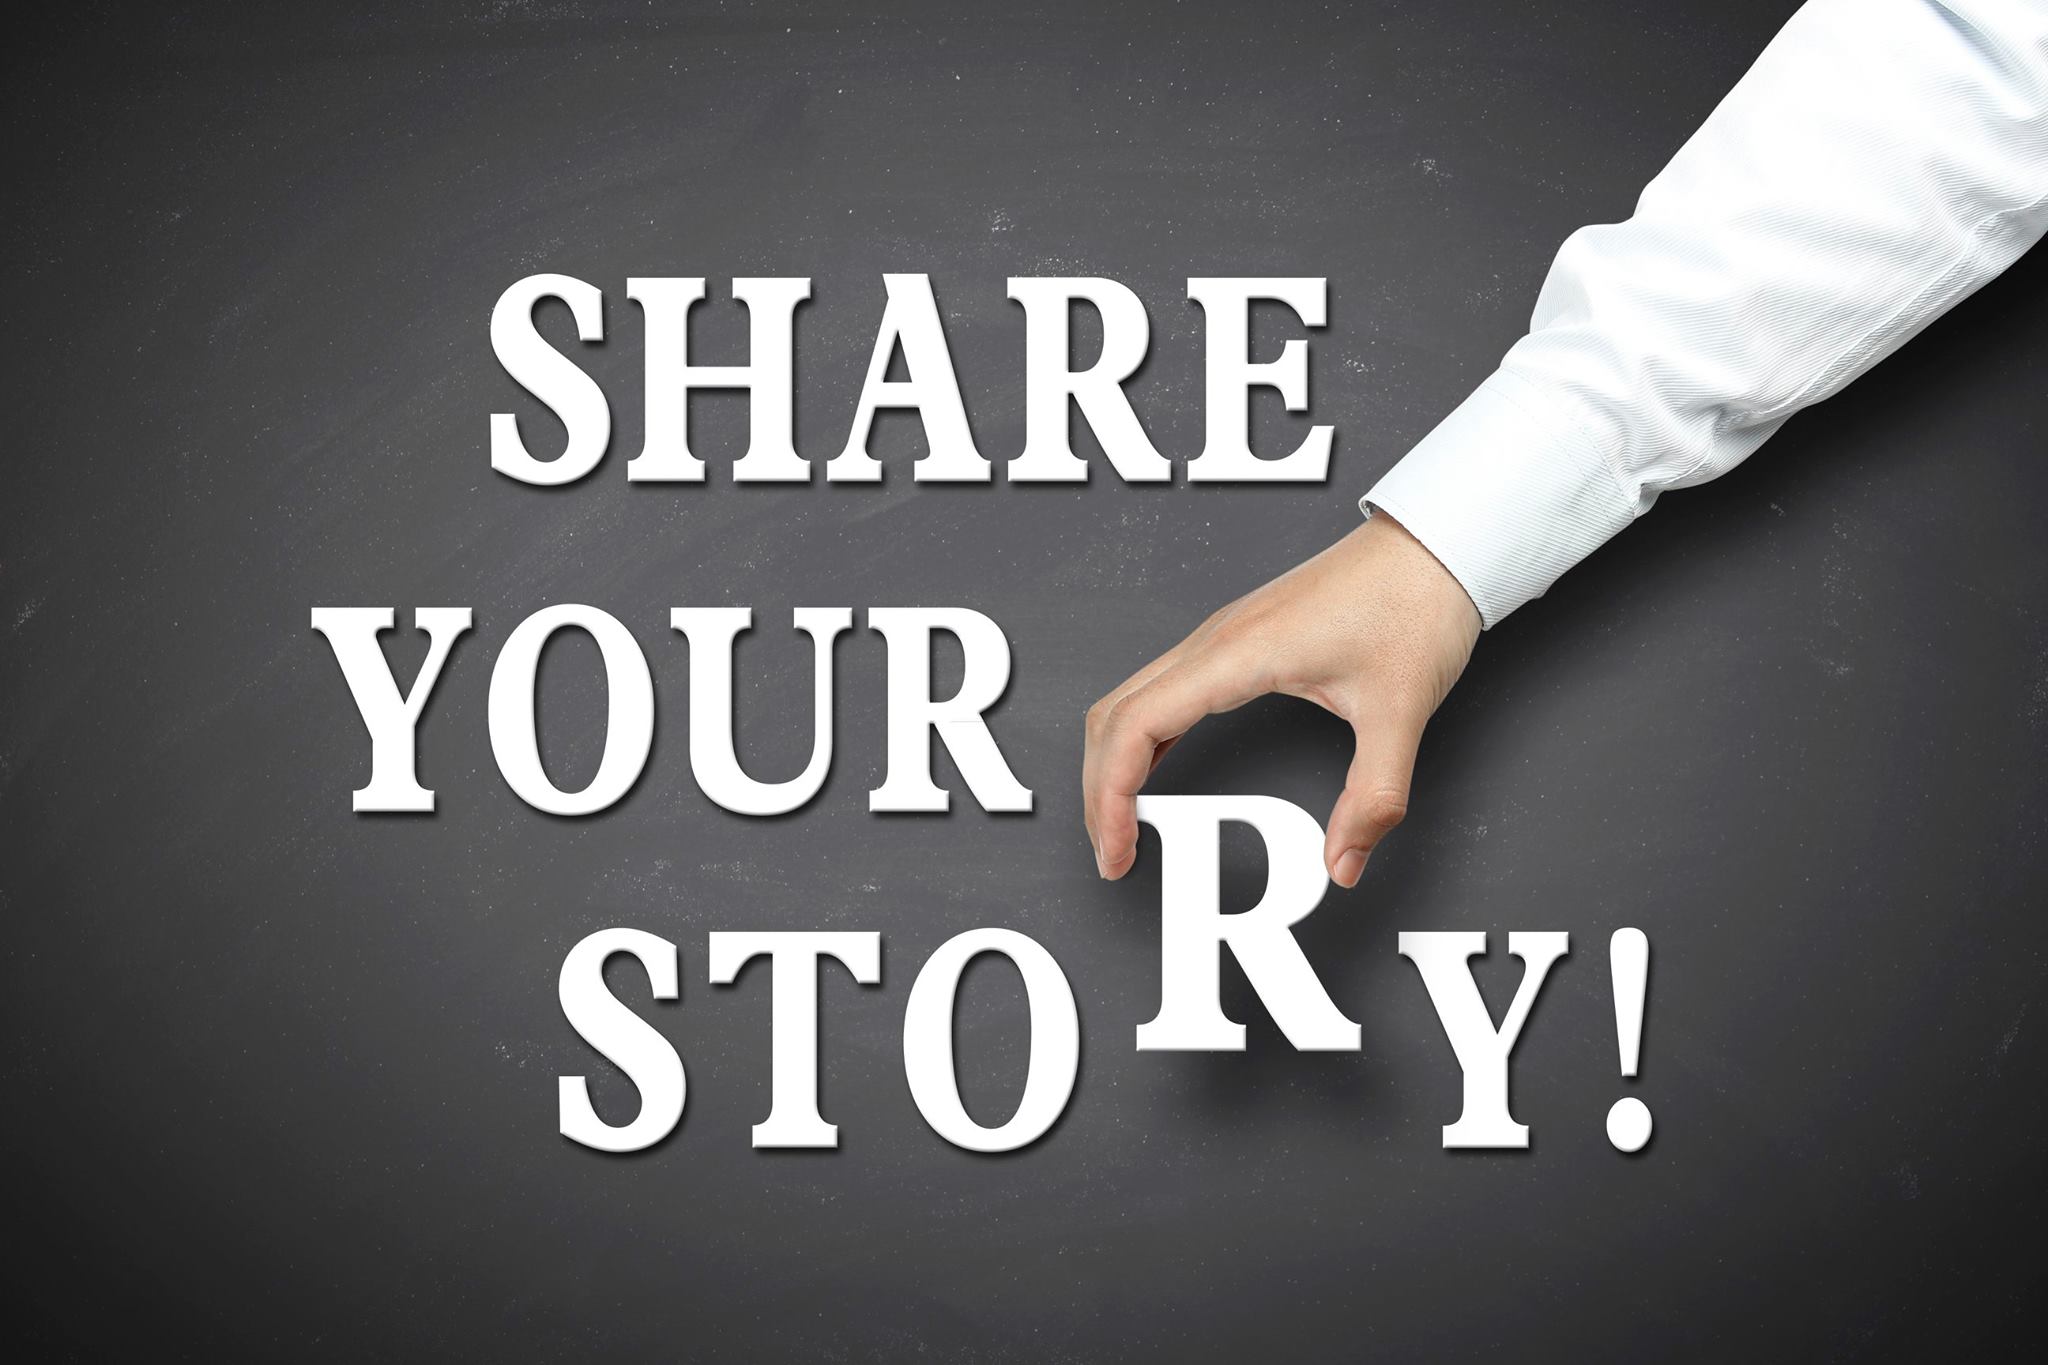 Remember to share your story